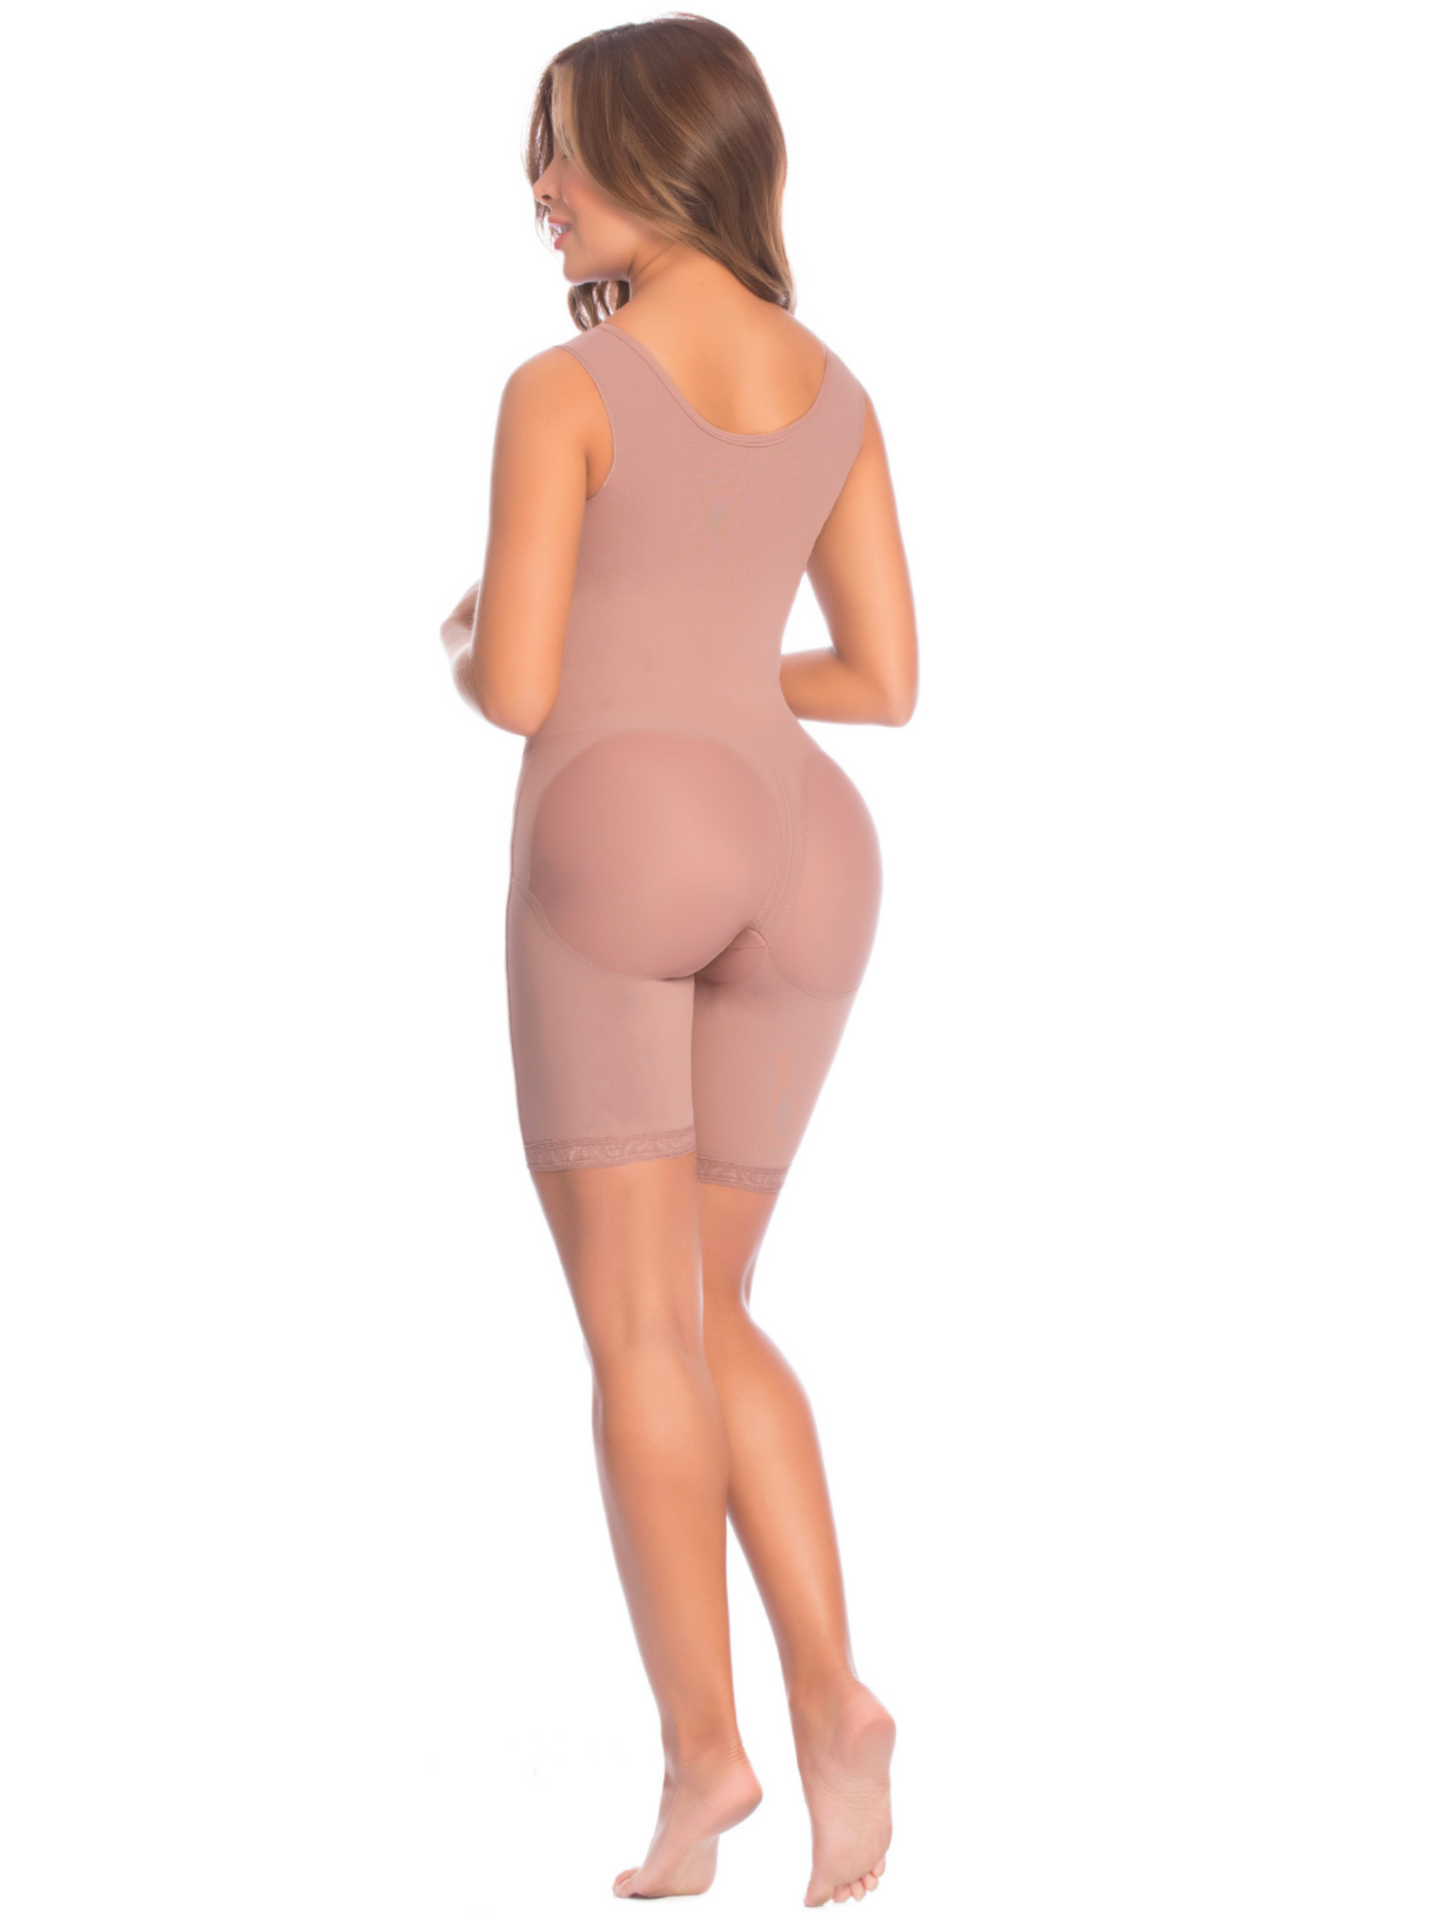 Girdle with Mid-Leg Bra and Side Zipper - Ref 09216